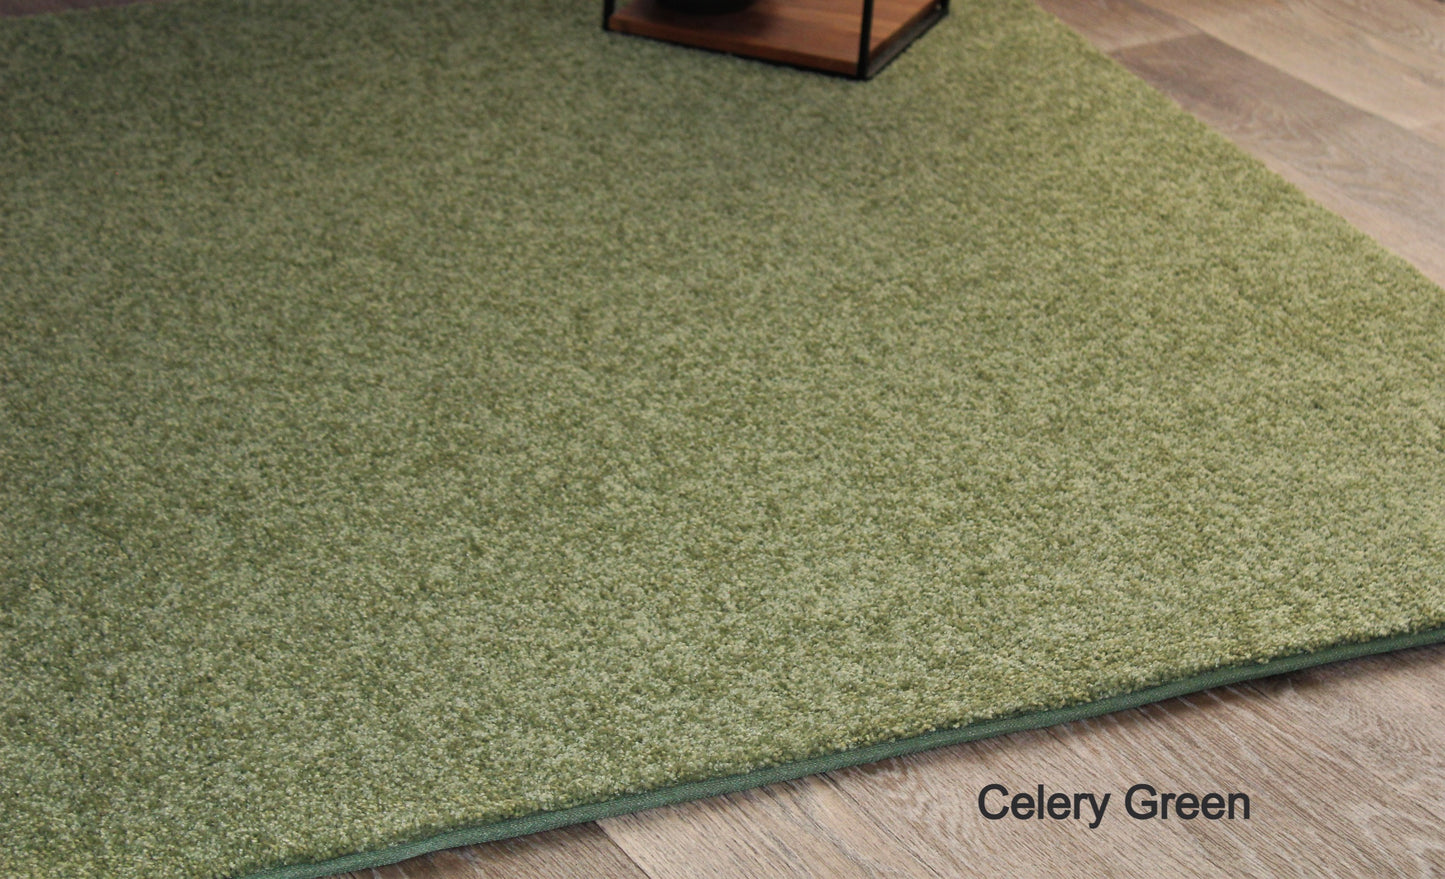 Celery Green Area Rug side view in living room